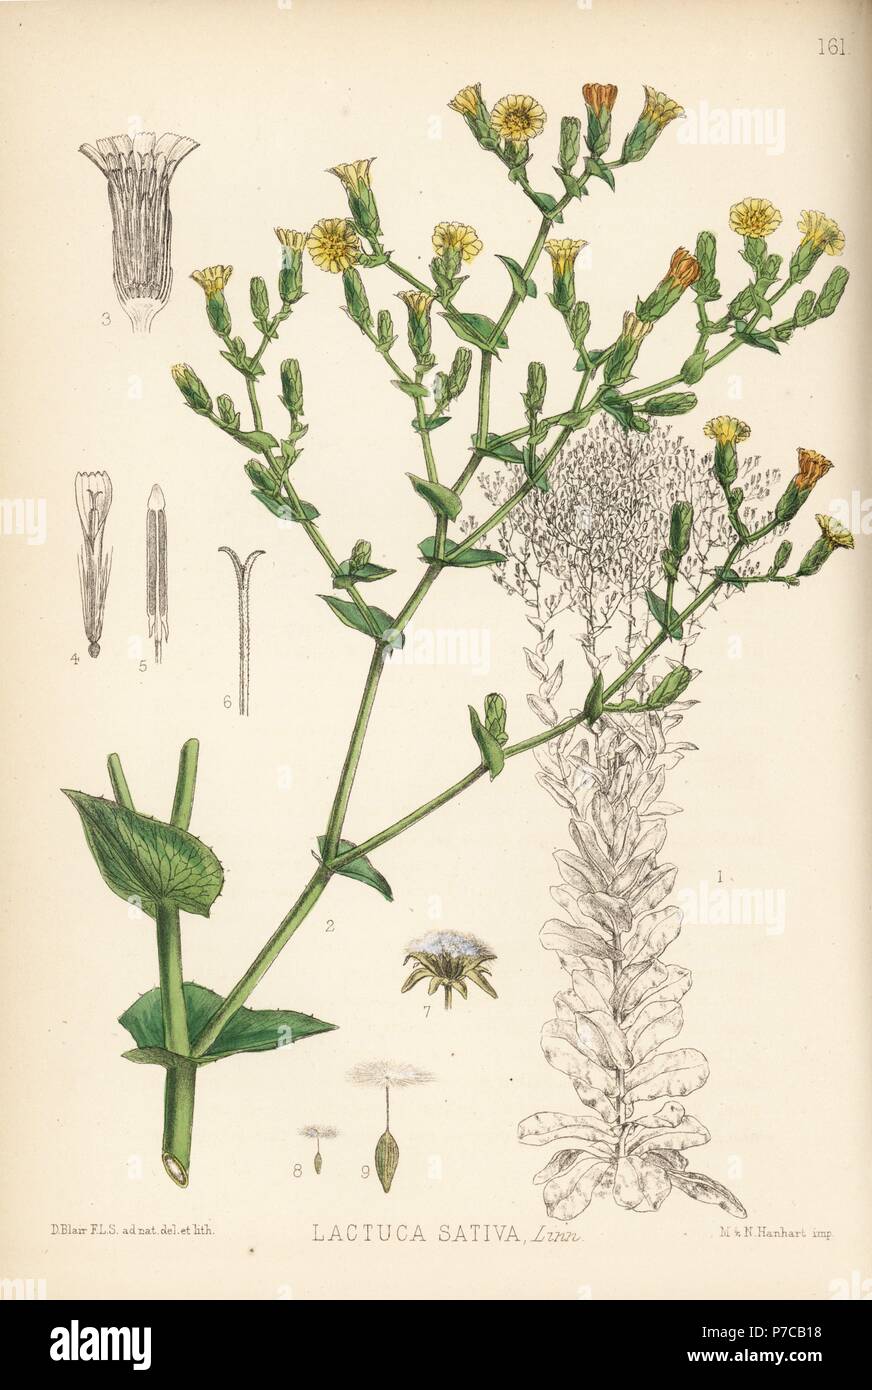 Garden lettuce, Lactuca sativa. Handcoloured lithograph by Hanhart after a botanical illustration by David Blair from Robert Bentley and Henry Trimen's Medicinal Plants, London, 1880. Stock Photo